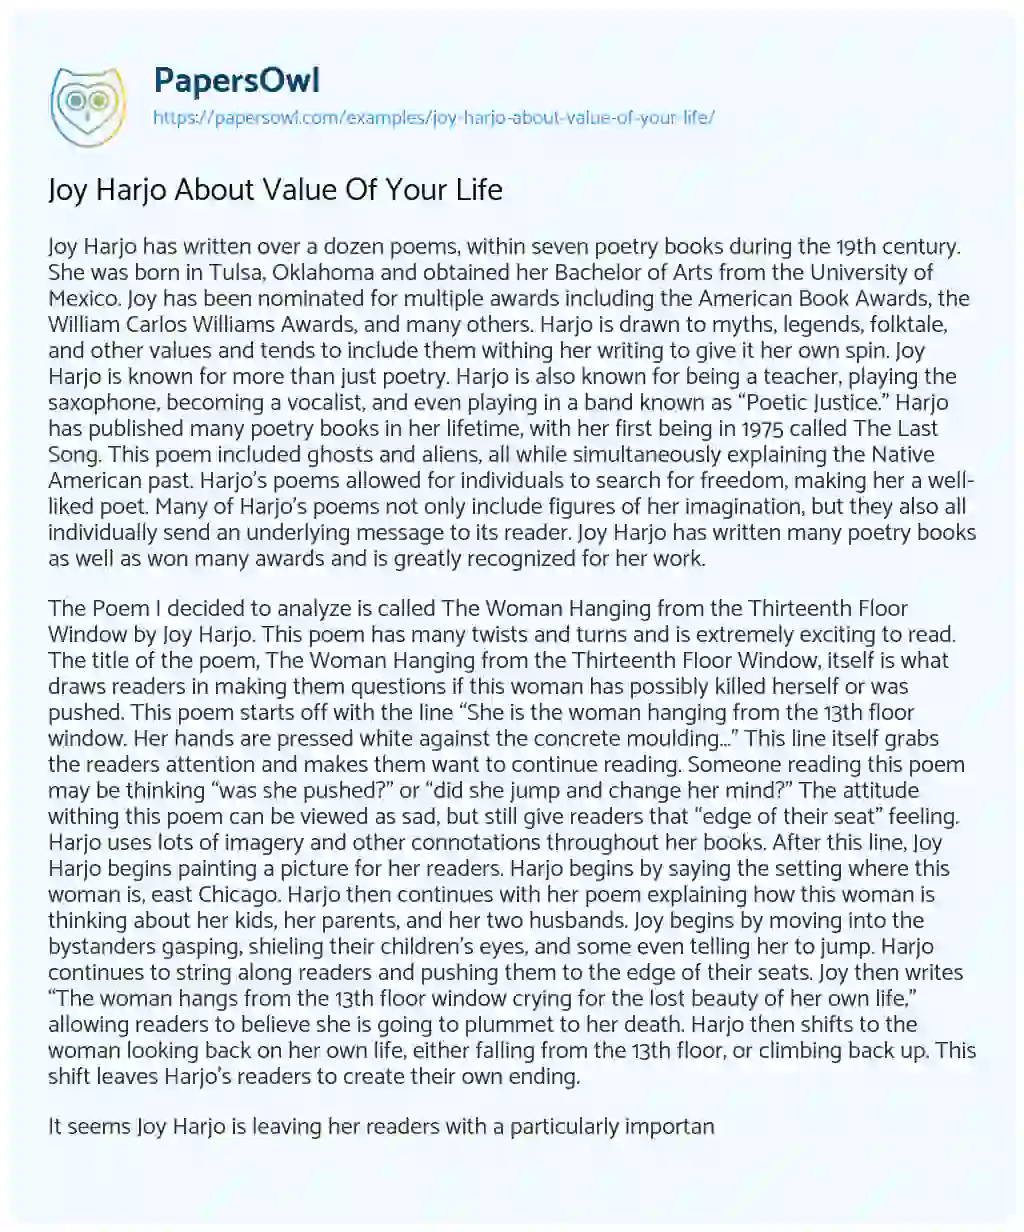 Essay on Joy Harjo about Value of your Life